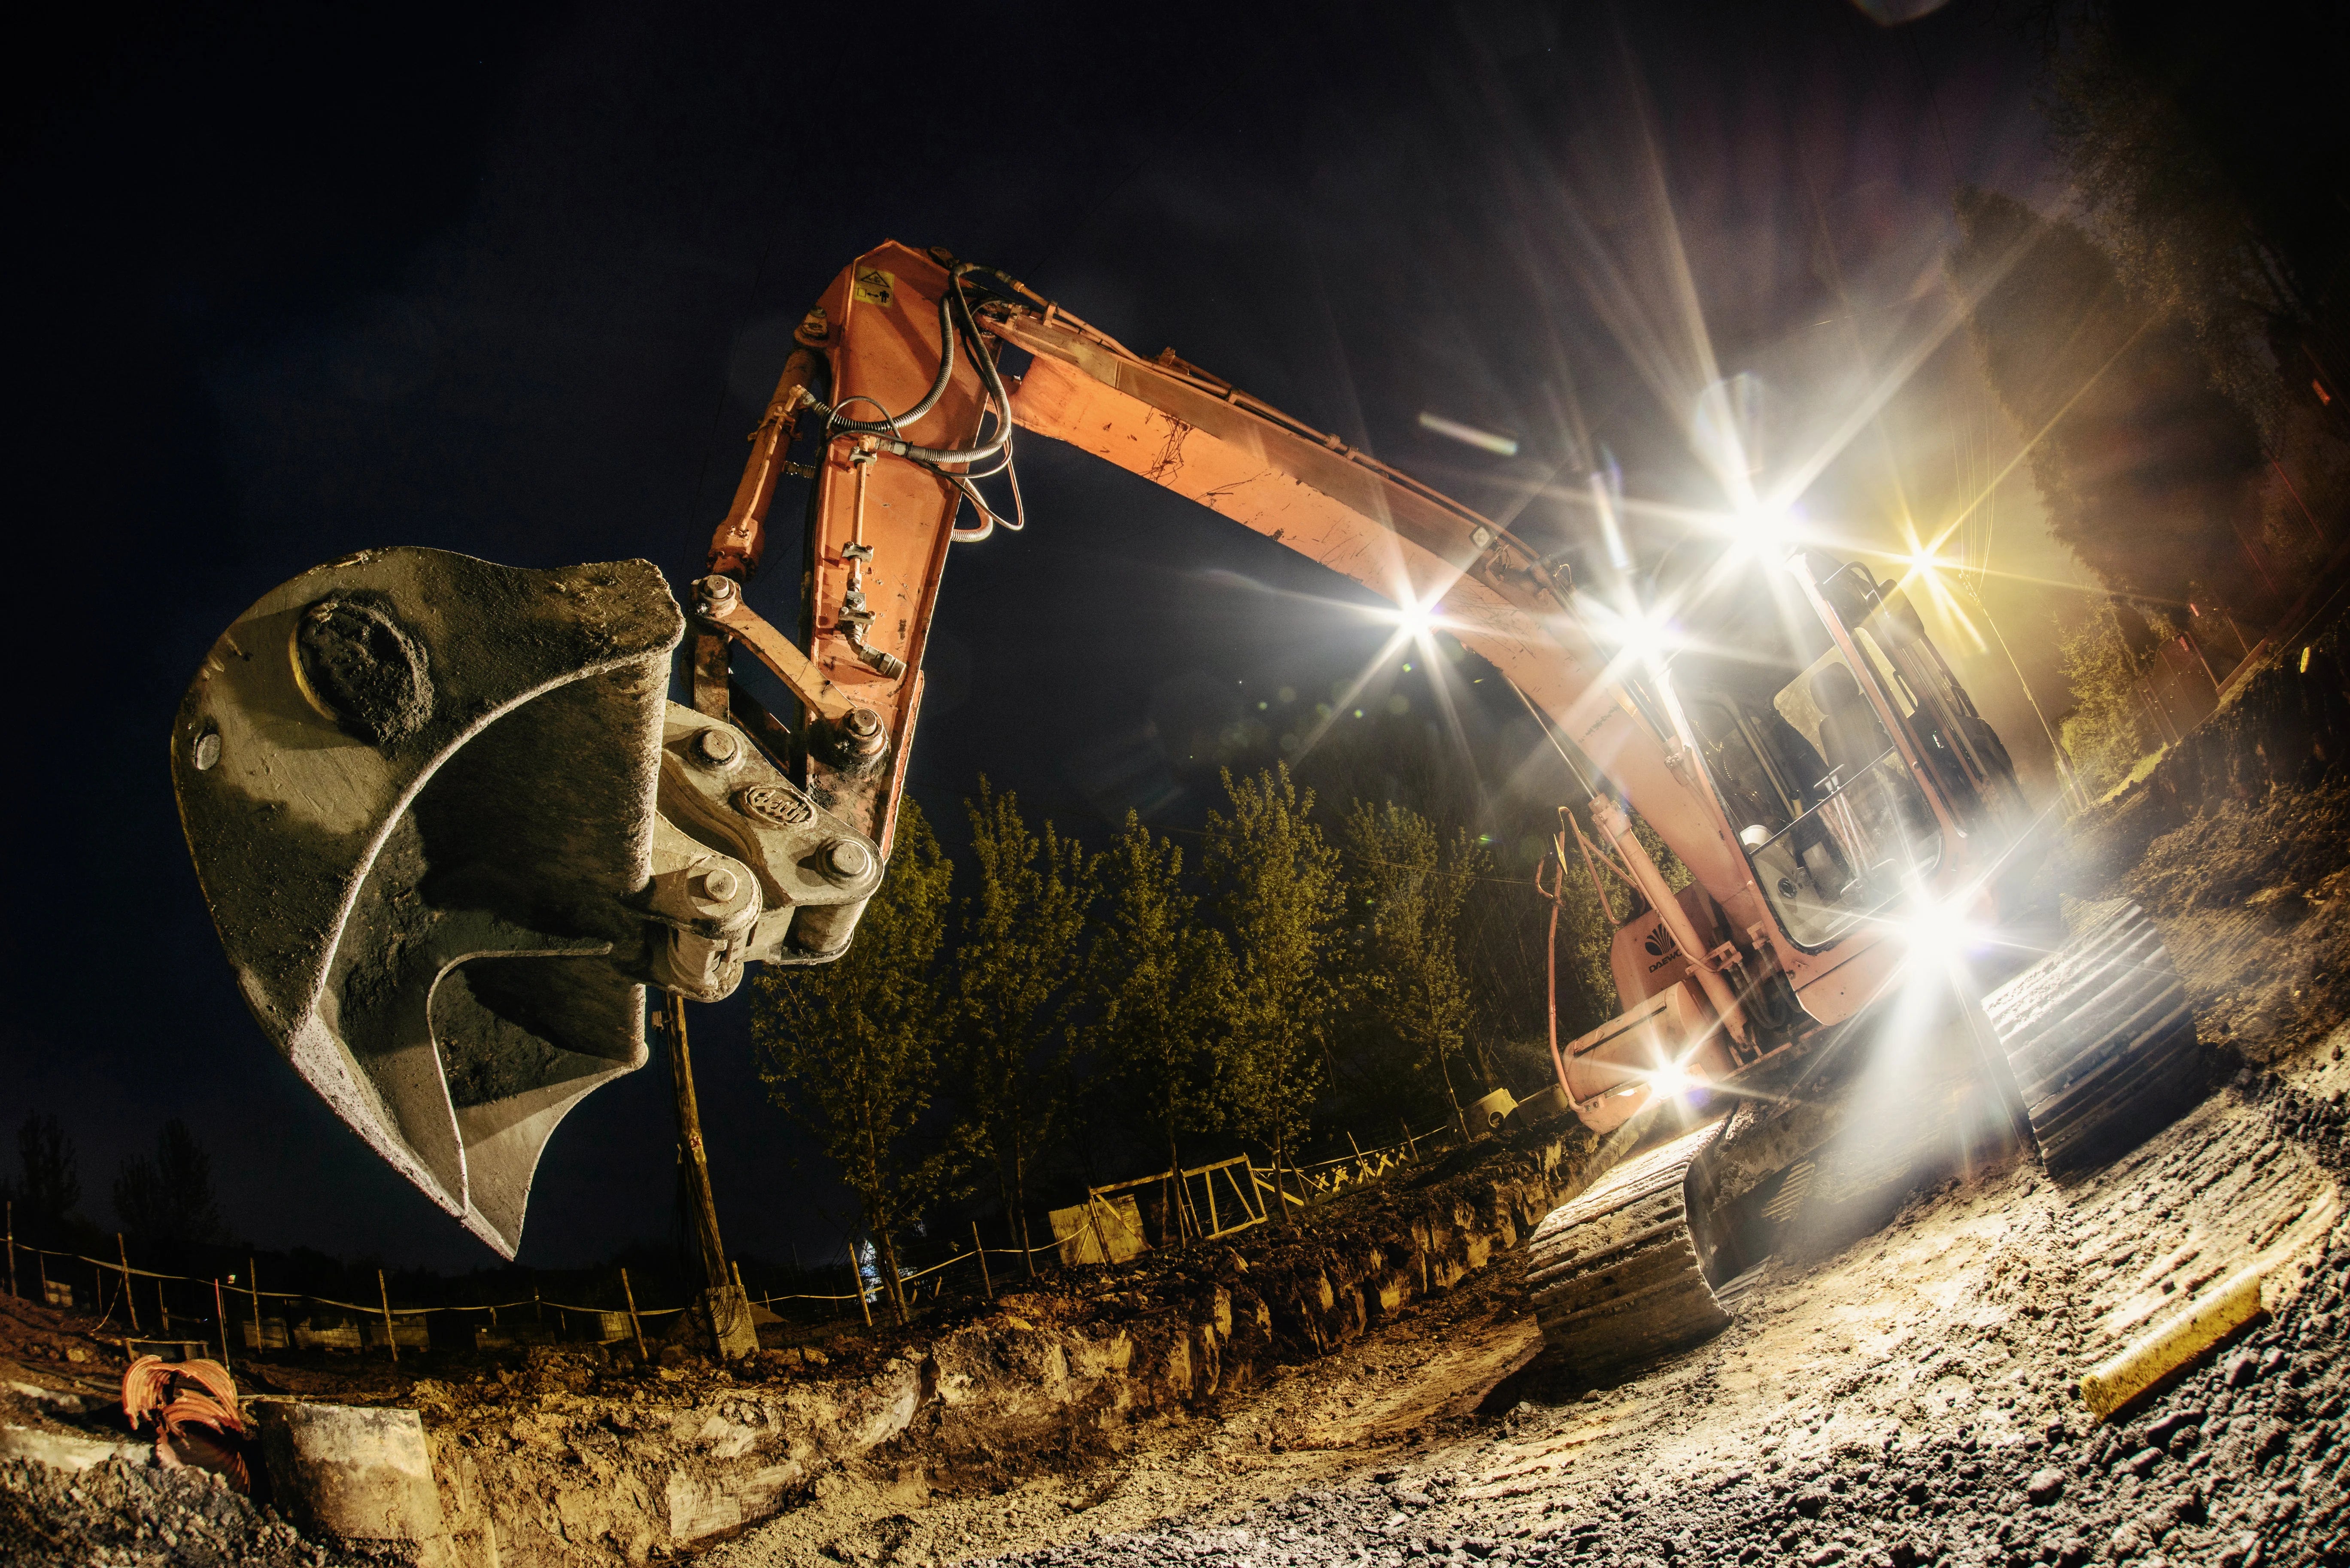 Doosan Excavator at night using its cab and machine lights. The lights are shining on the orange paint of the excavator's arm and the big Geith bucket attached. 